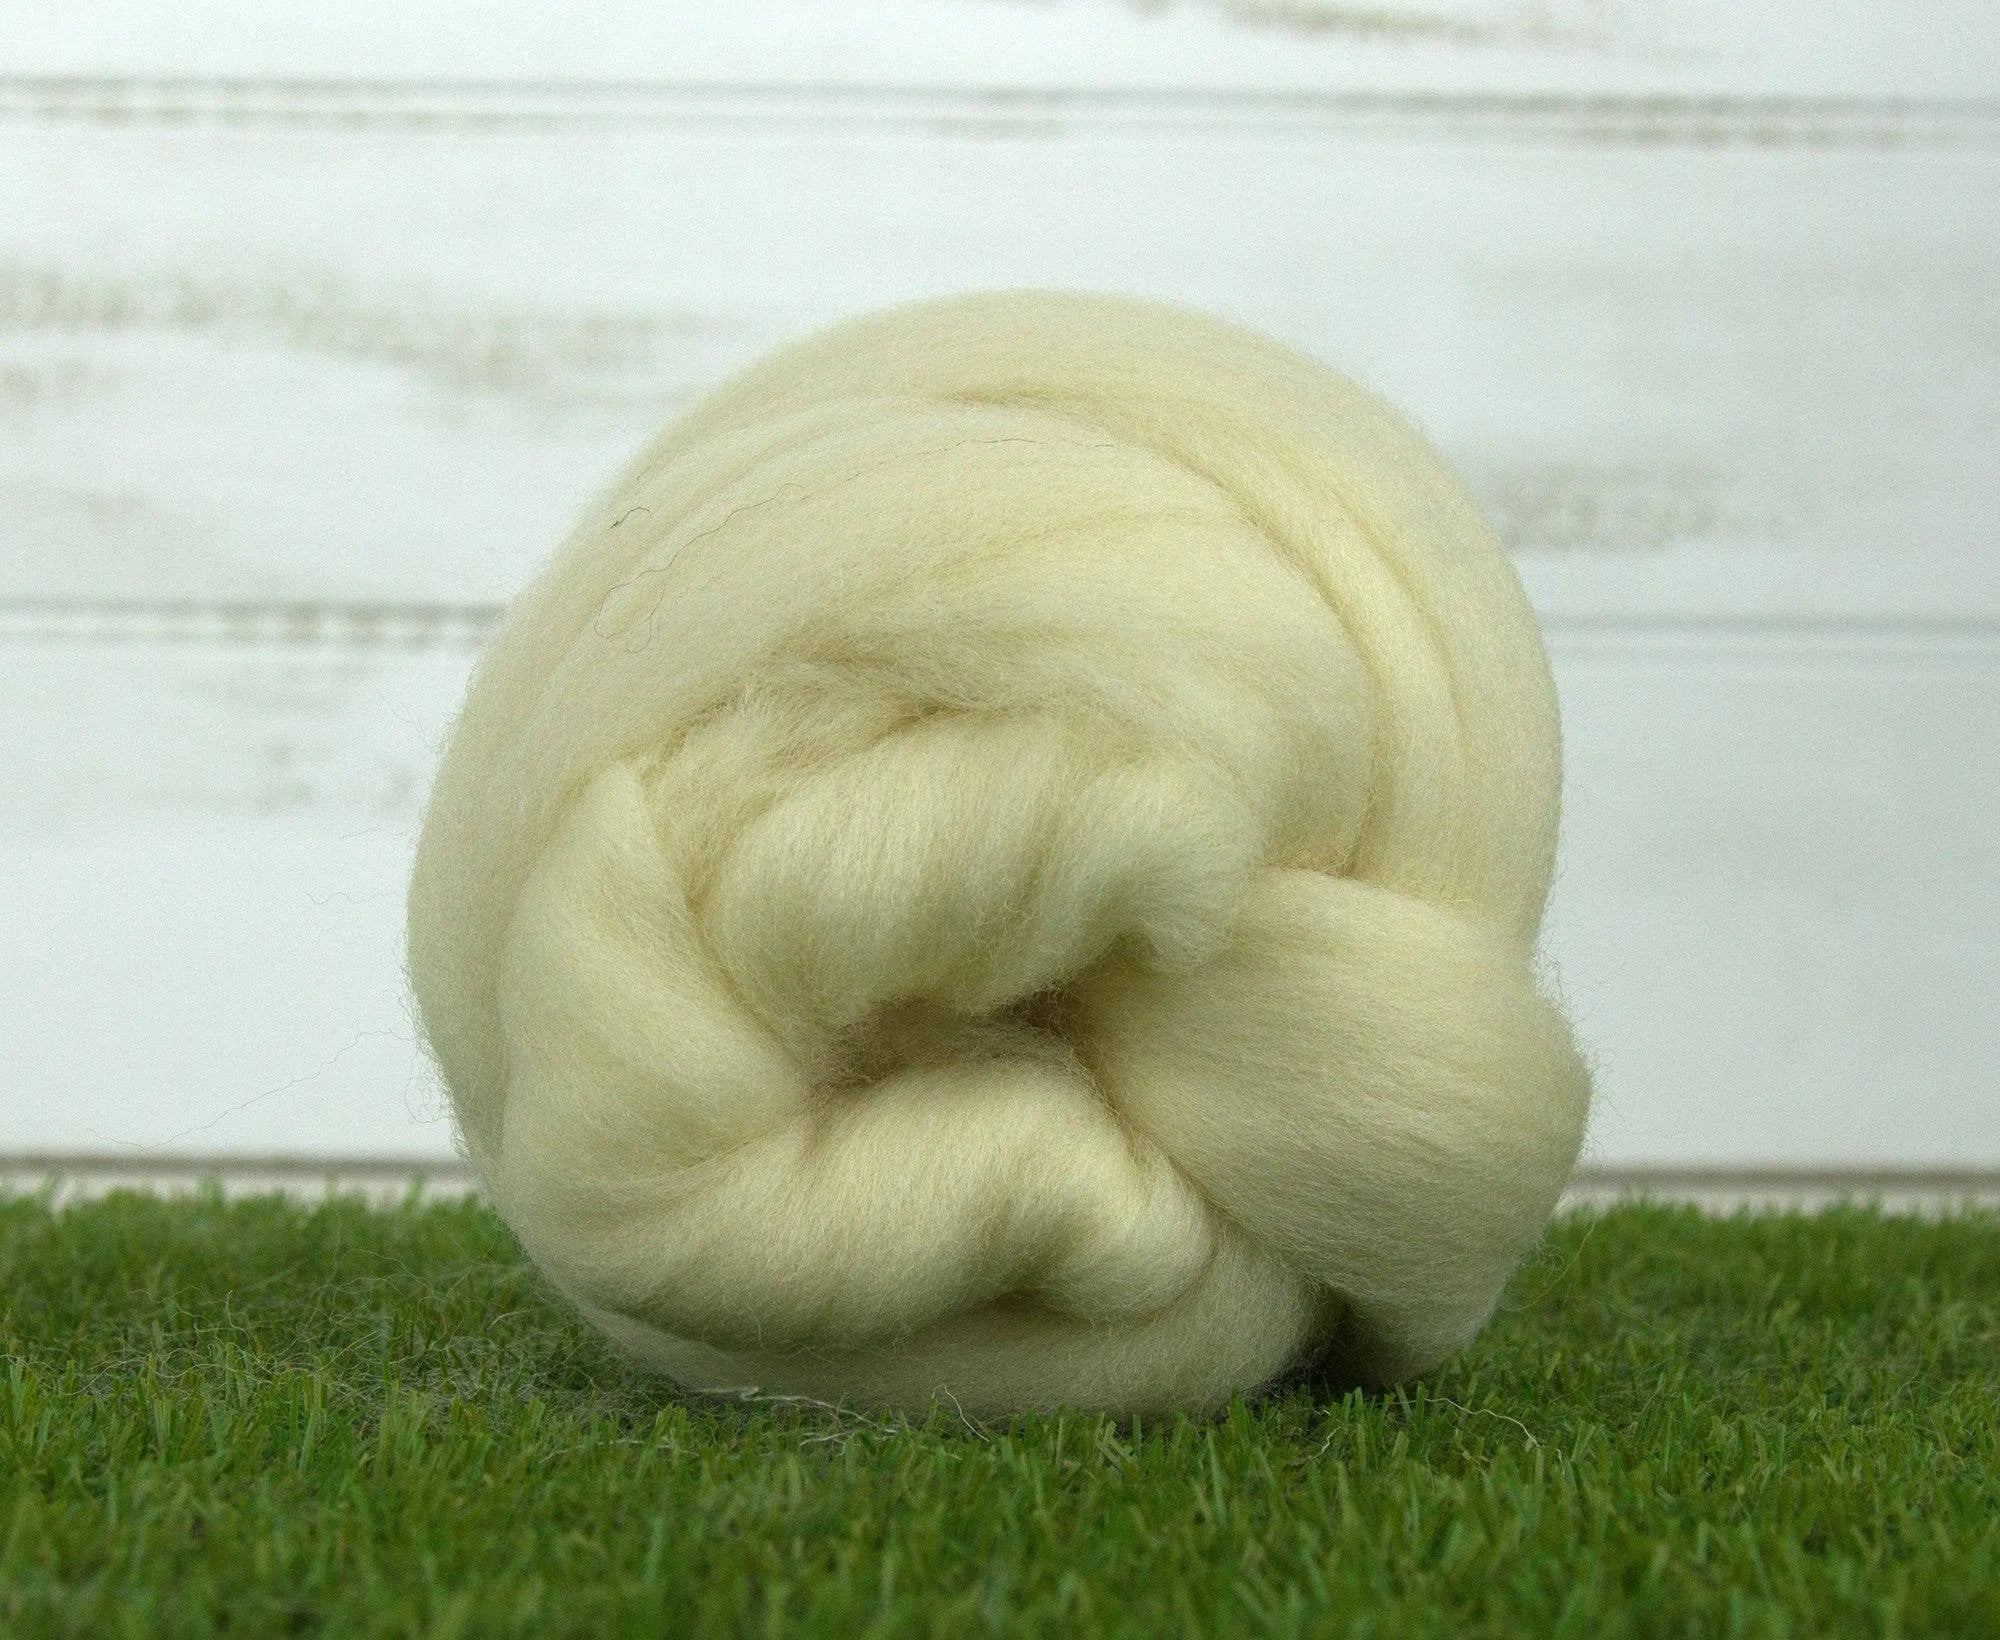 White Southdown Top - World of Wool